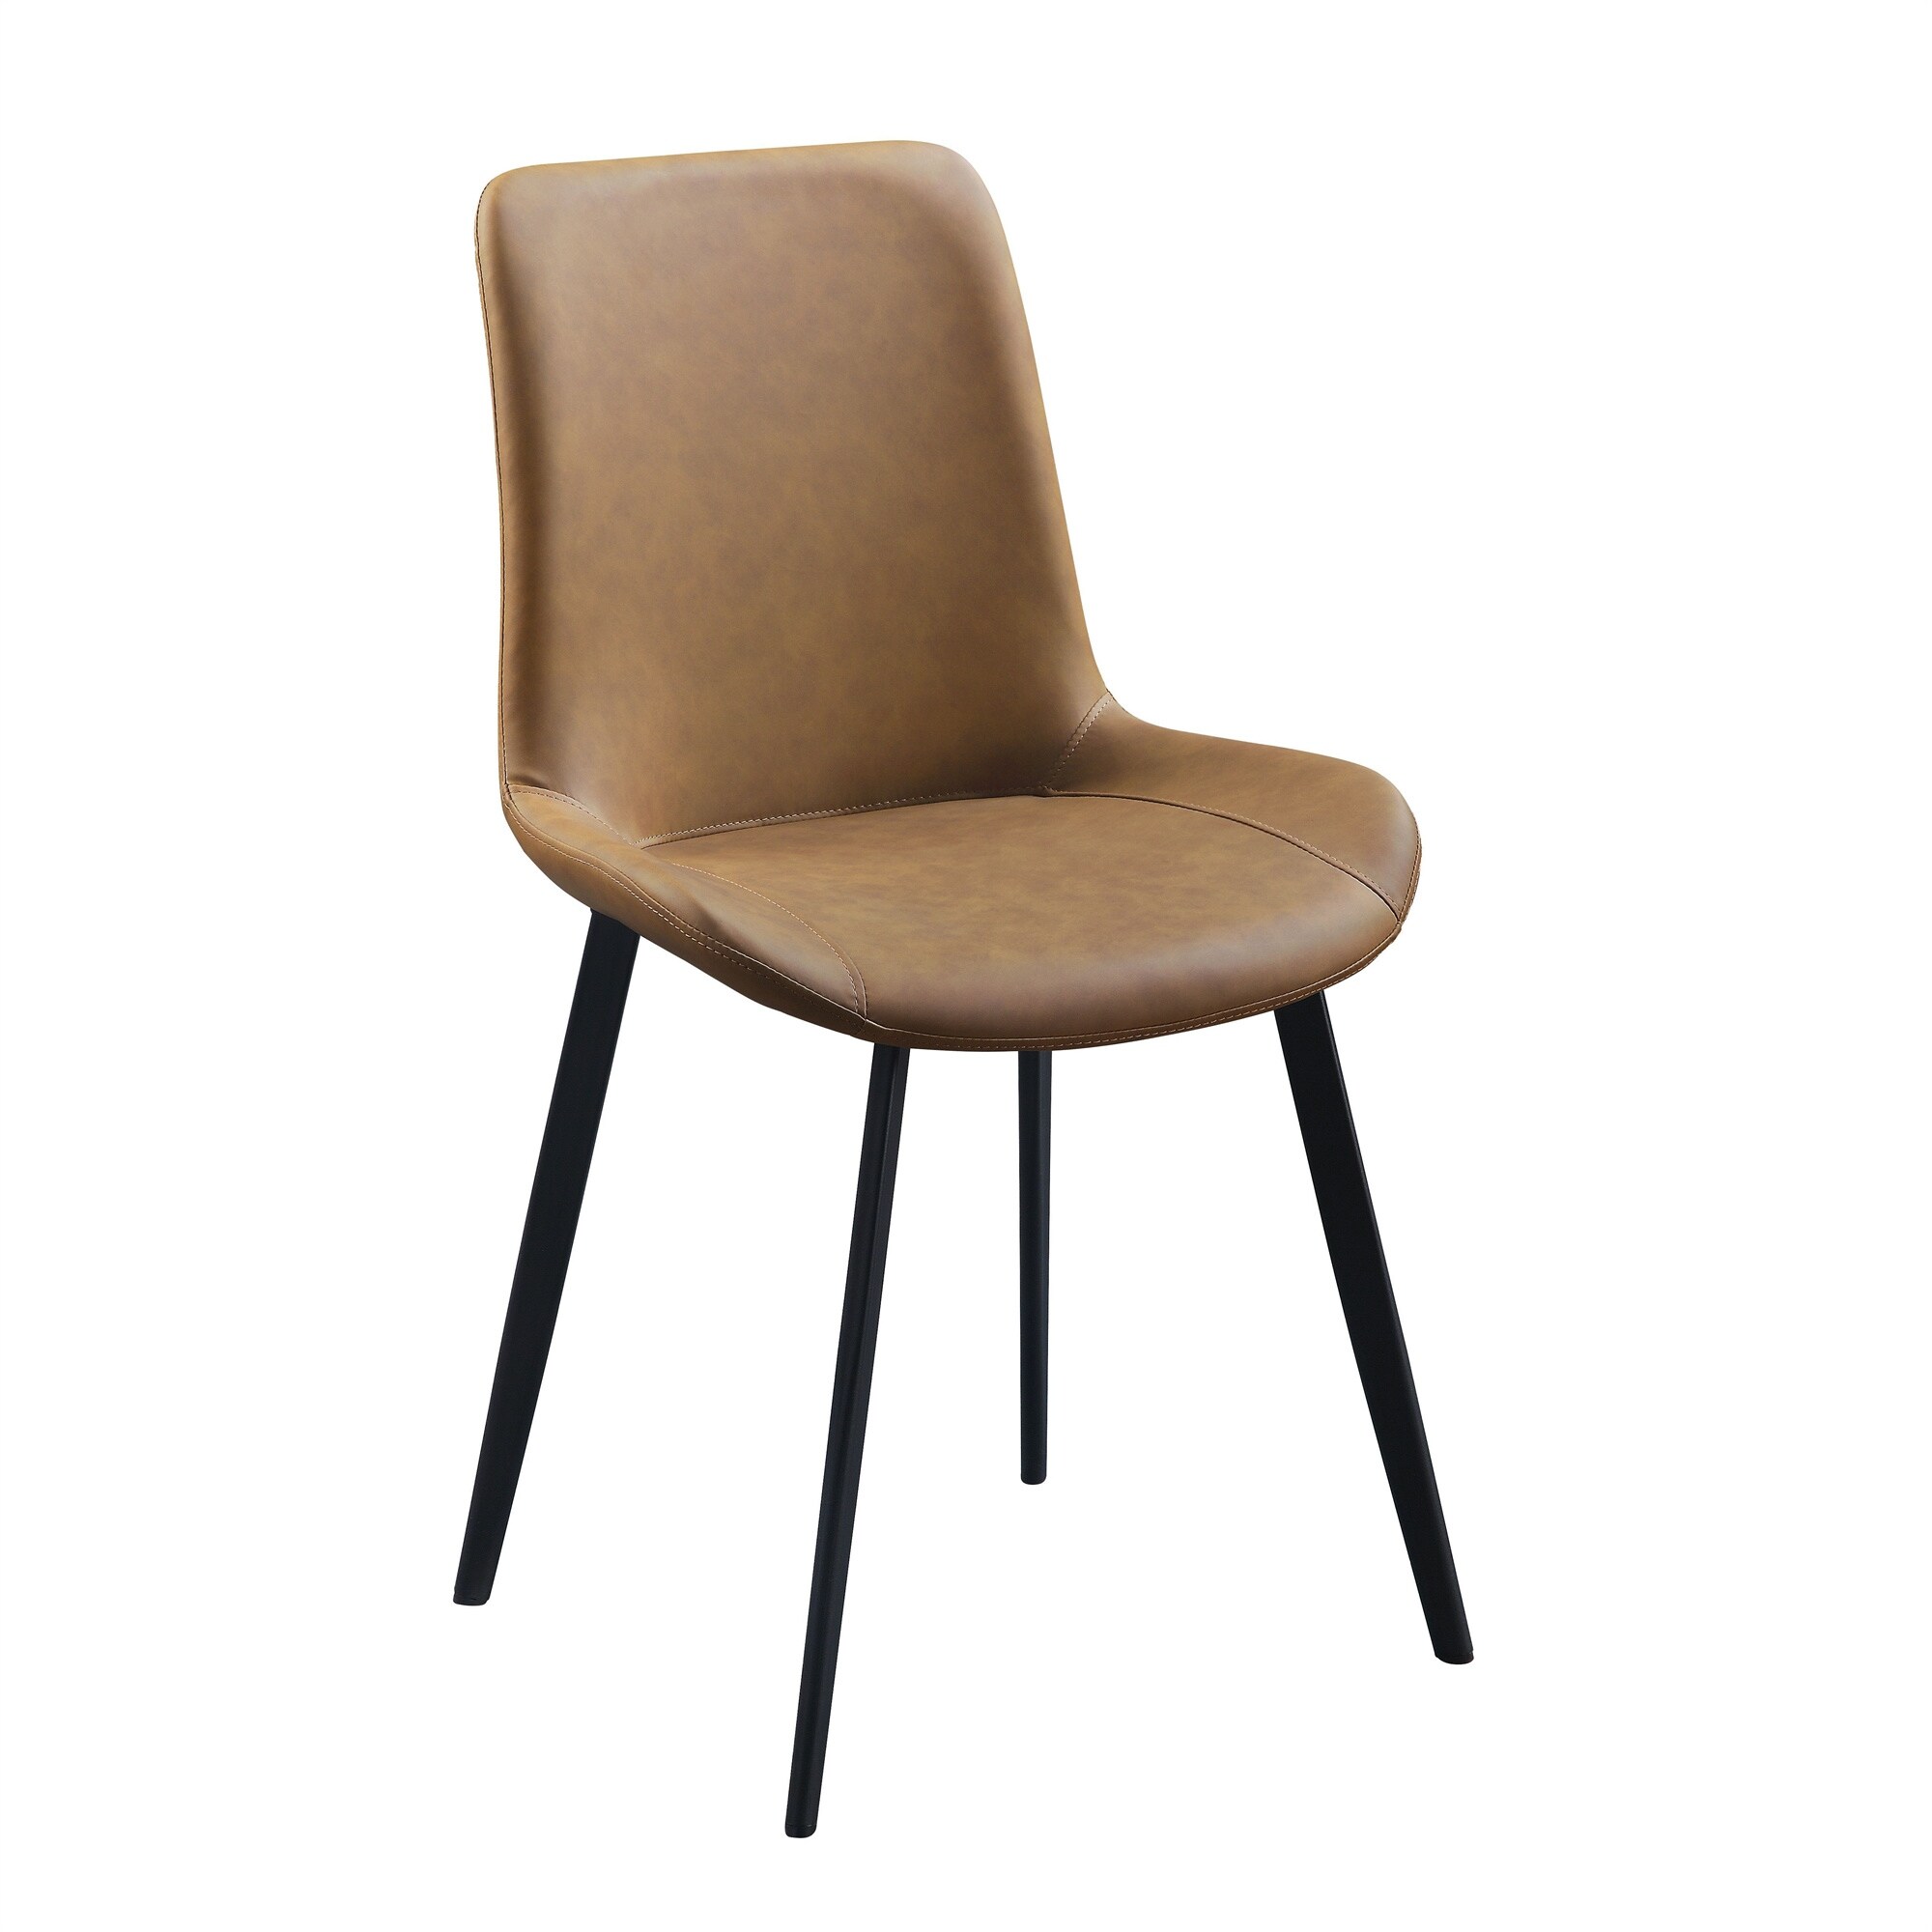 Side Chair 2 piece in Brown PU,Parsons-style ,distressed-wooden effect